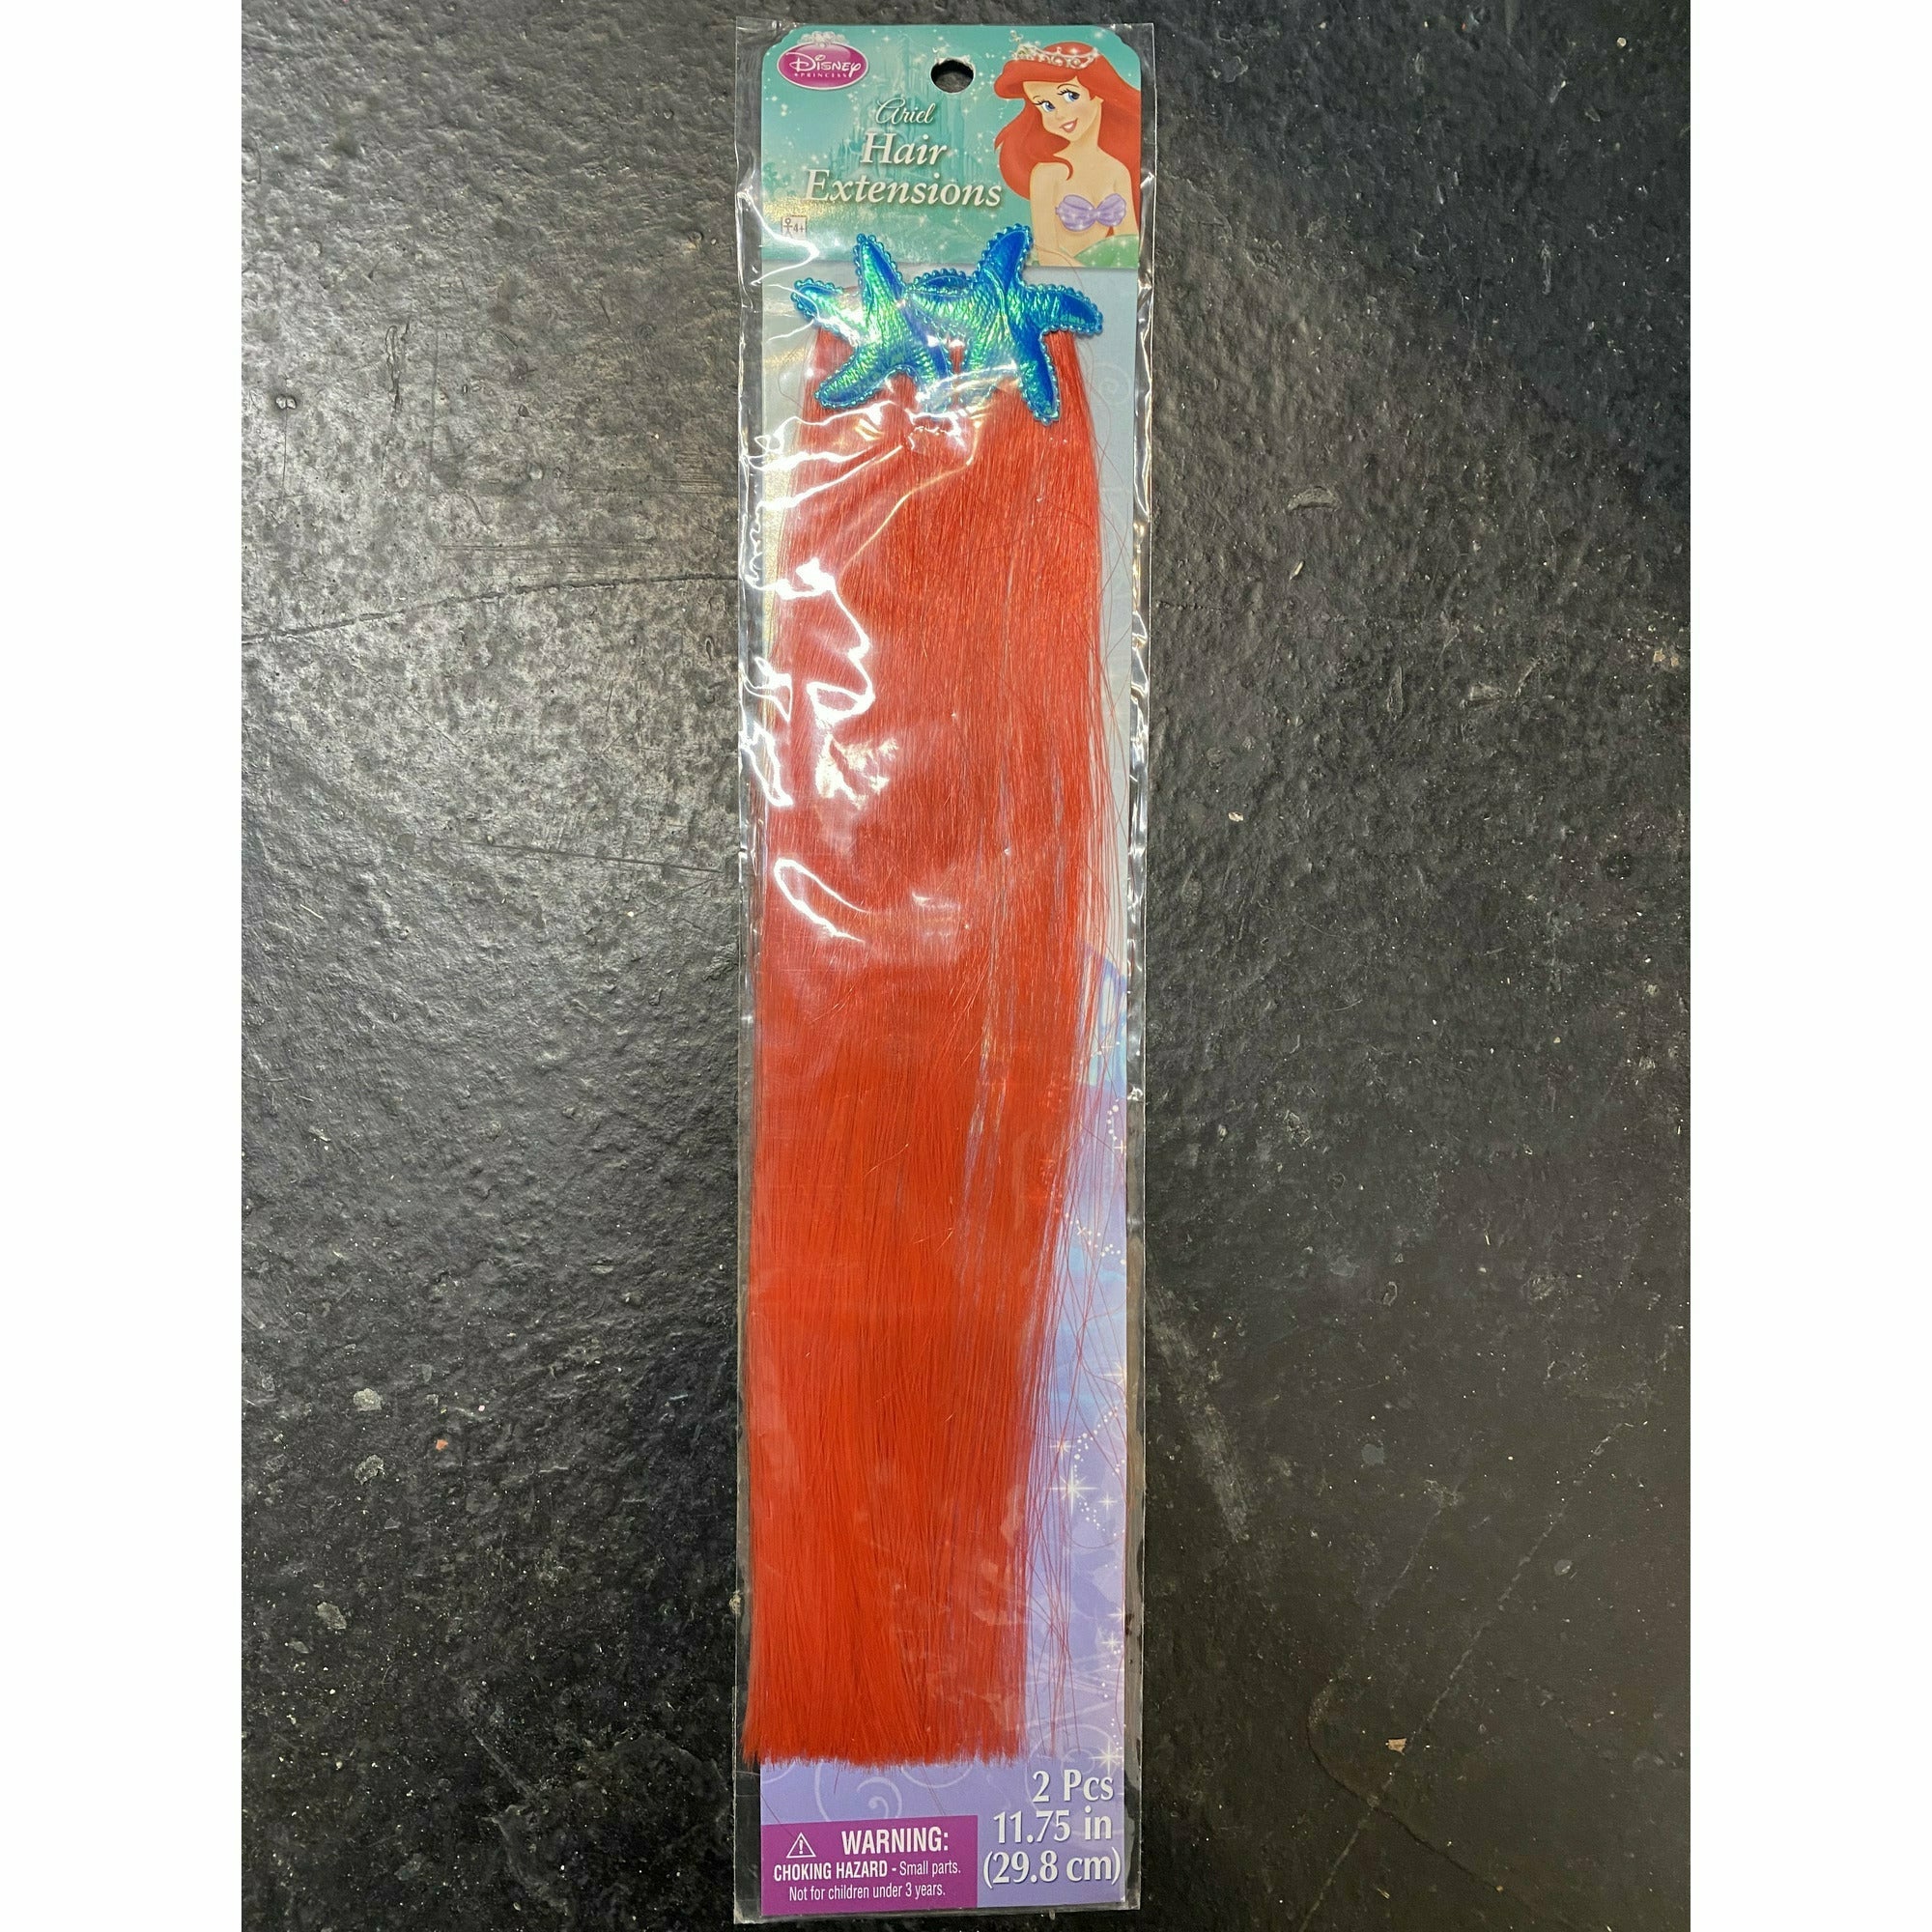 COSTUMES USA COSTUMES: ACCESSORIES Ariel Hair Extensions